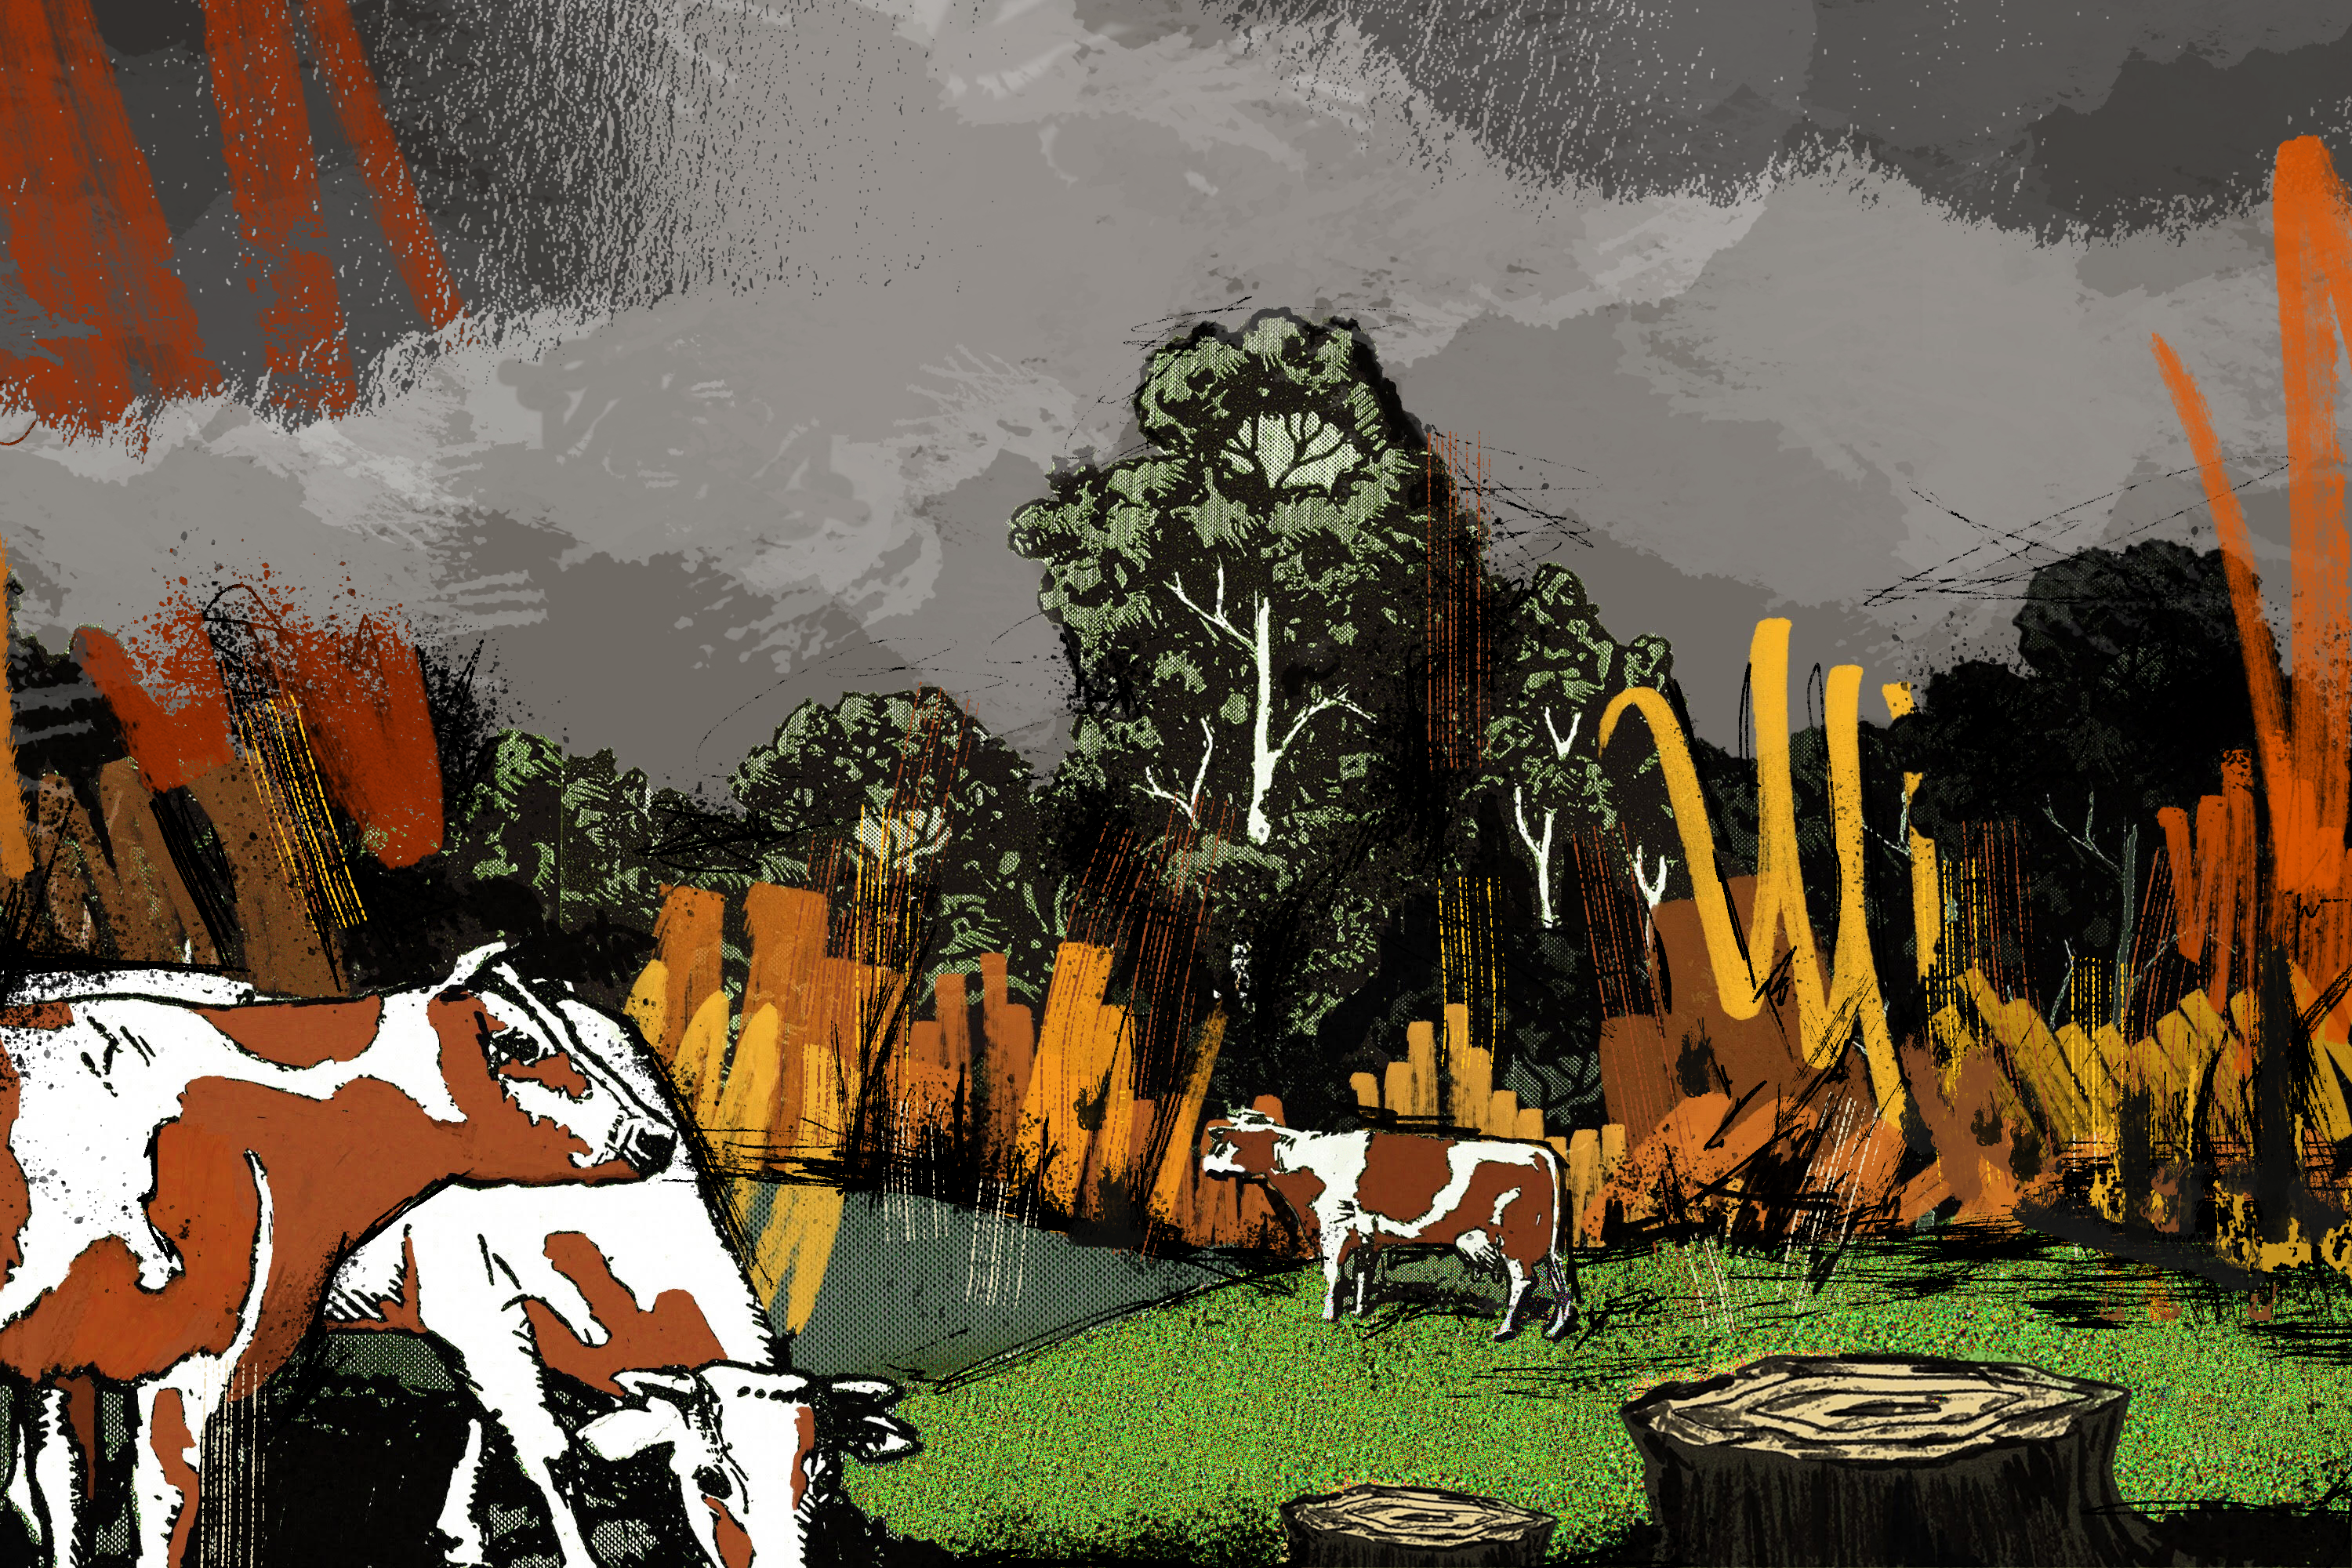 A drawing of cattle on the edge of a forest.